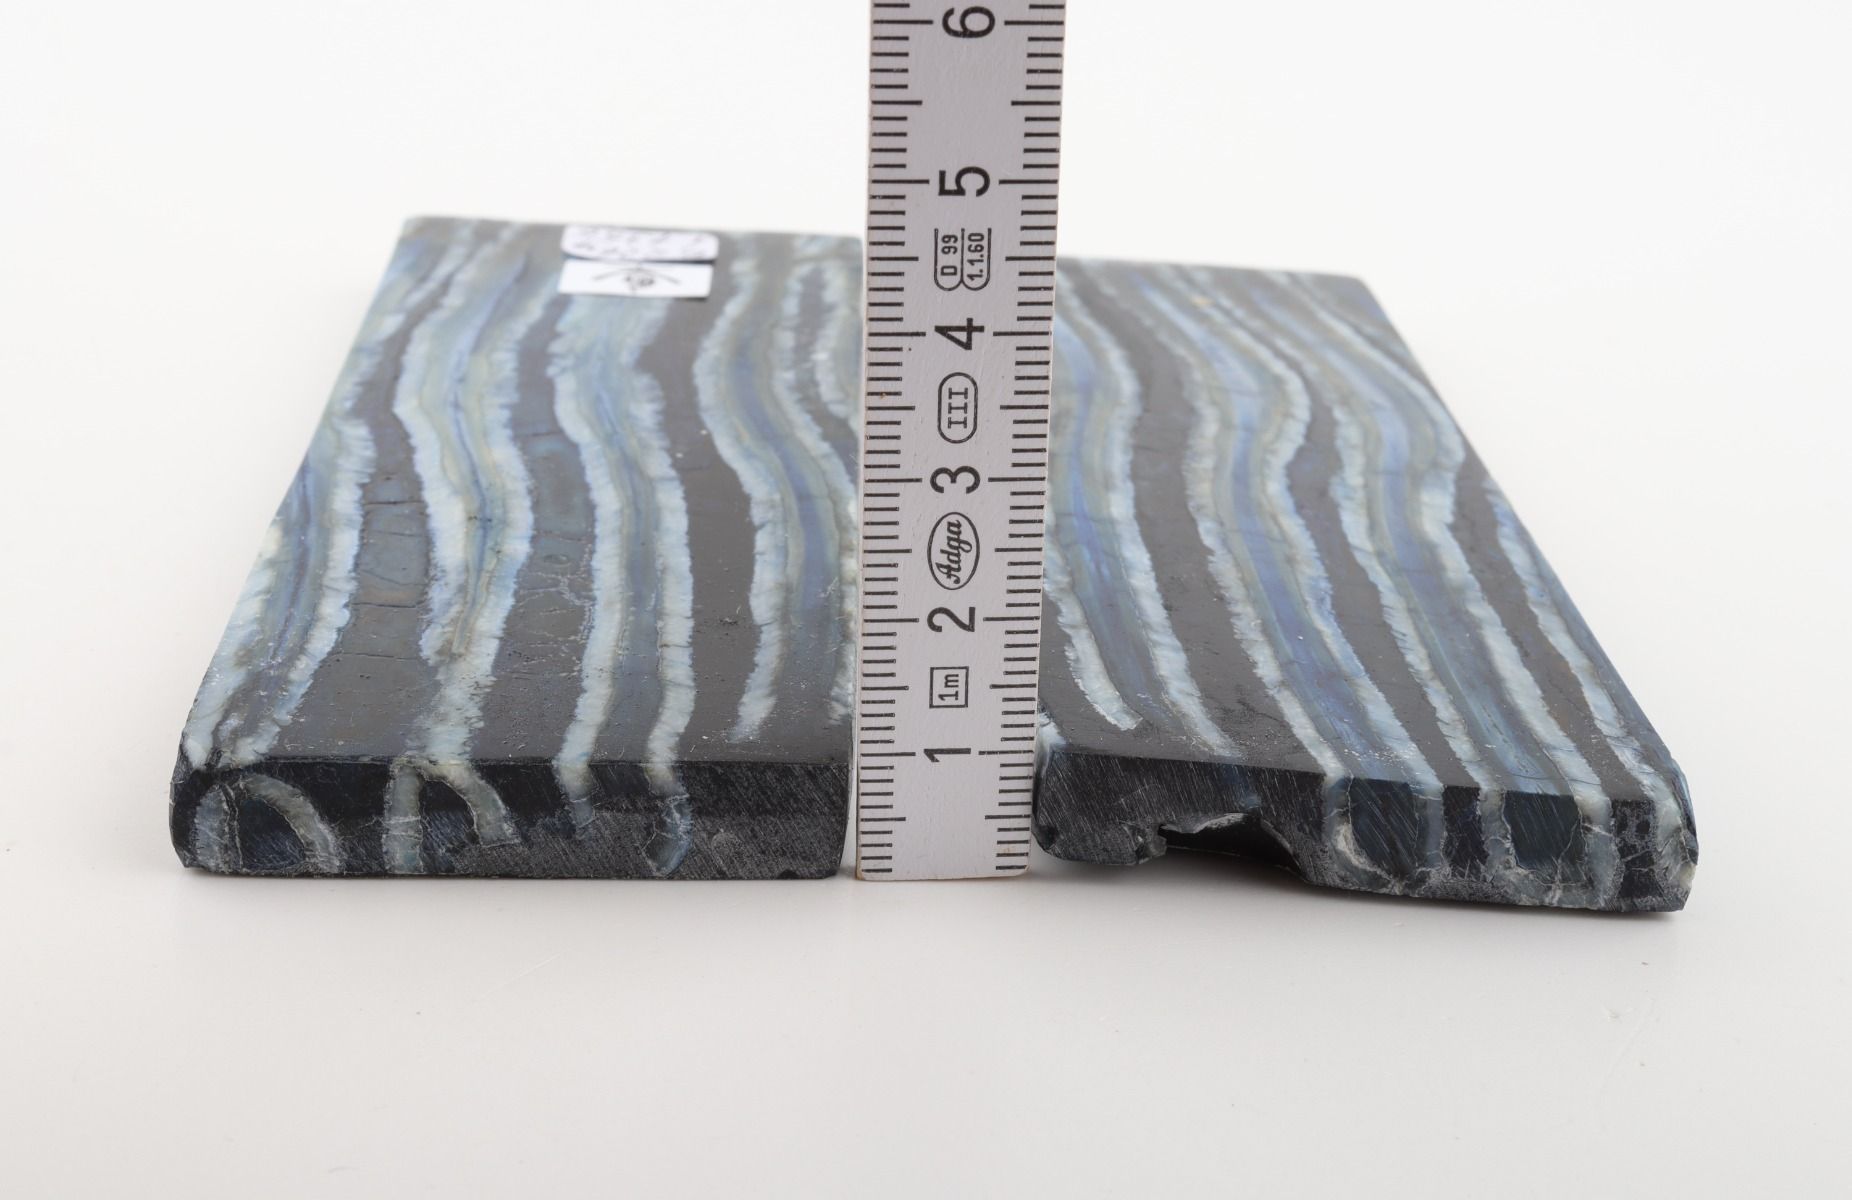 Stabilized mammoth molar scales